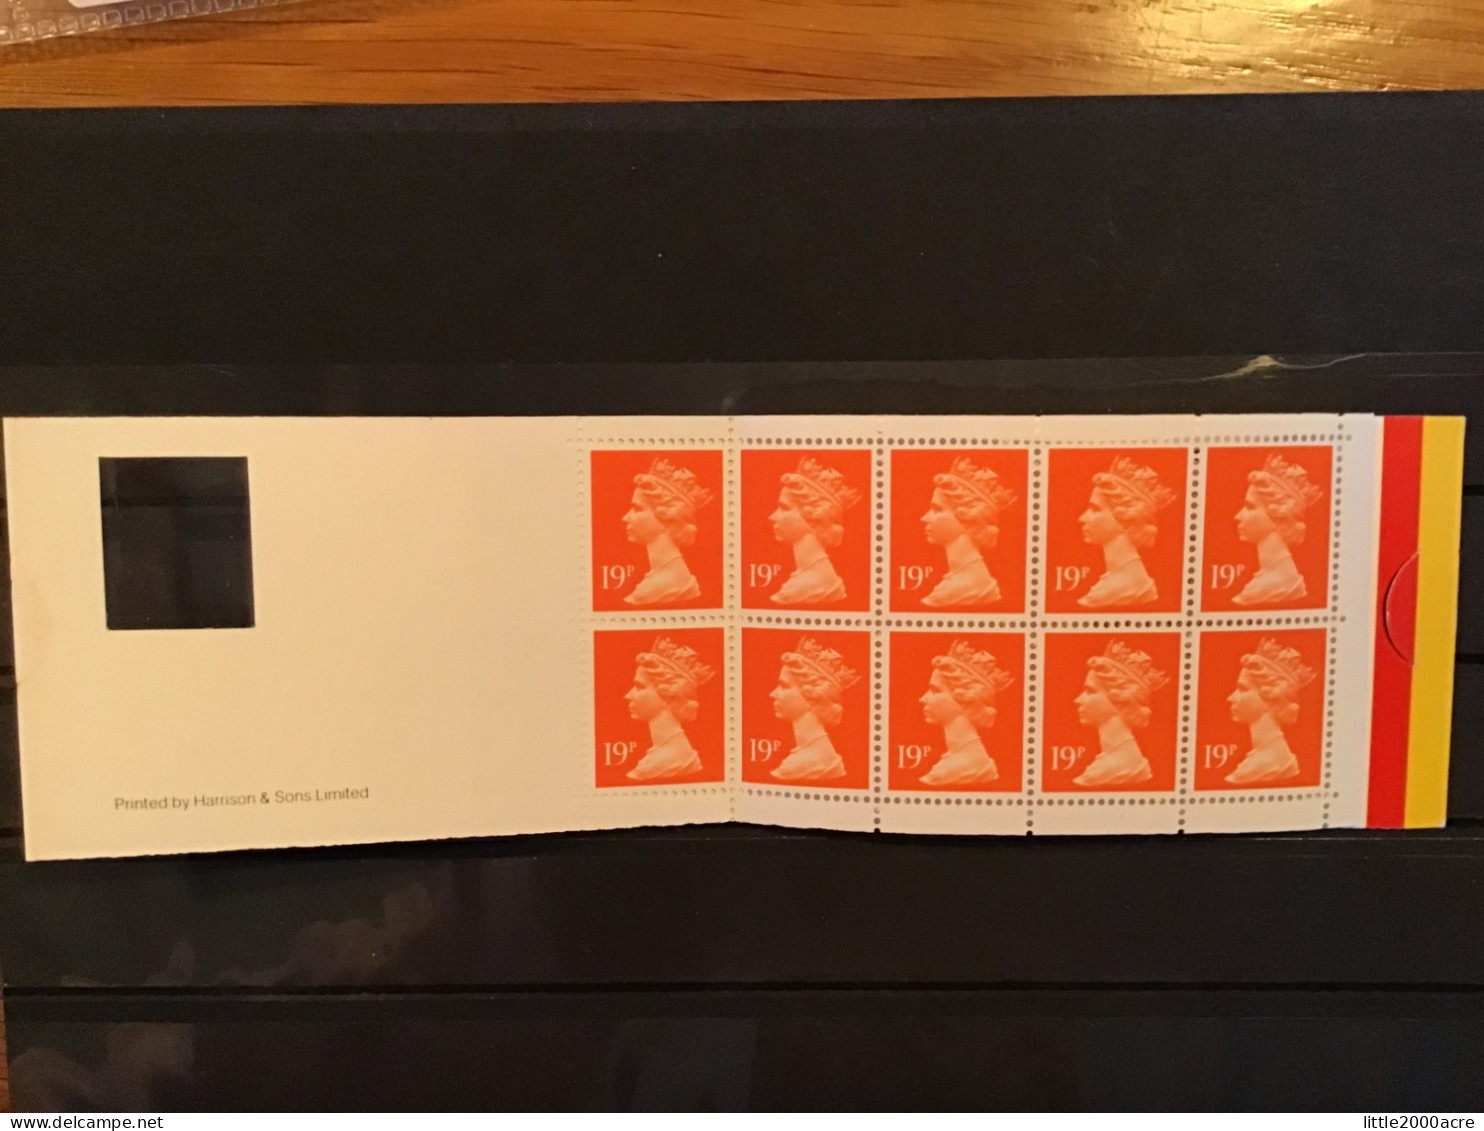 GB 1988 10 19p Stamps (code M) Barcode Booklet £1.90 MNH SG GP1 - Libretti